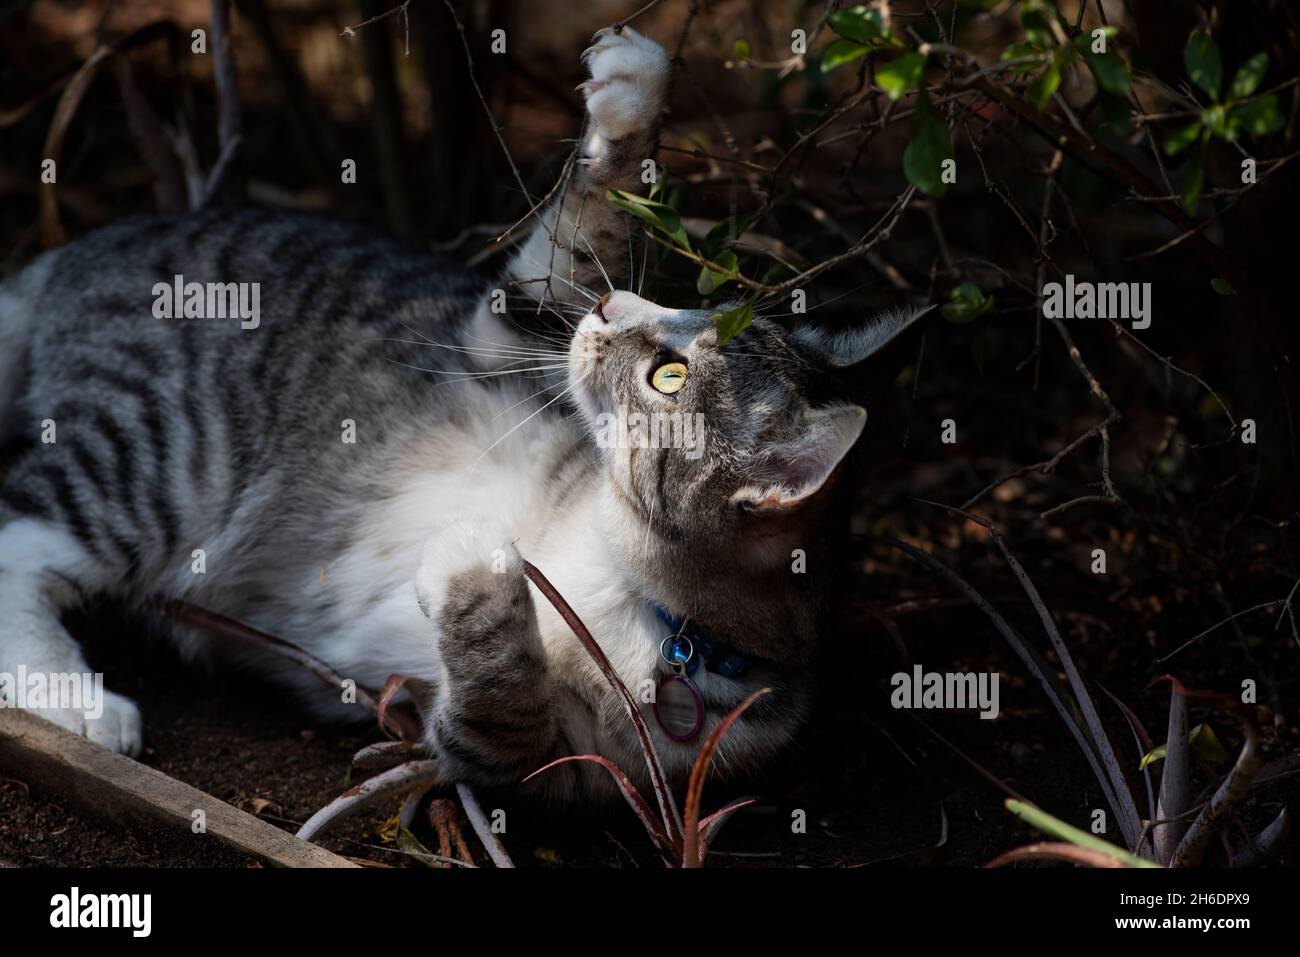 A young cat playing outside Stock Photo